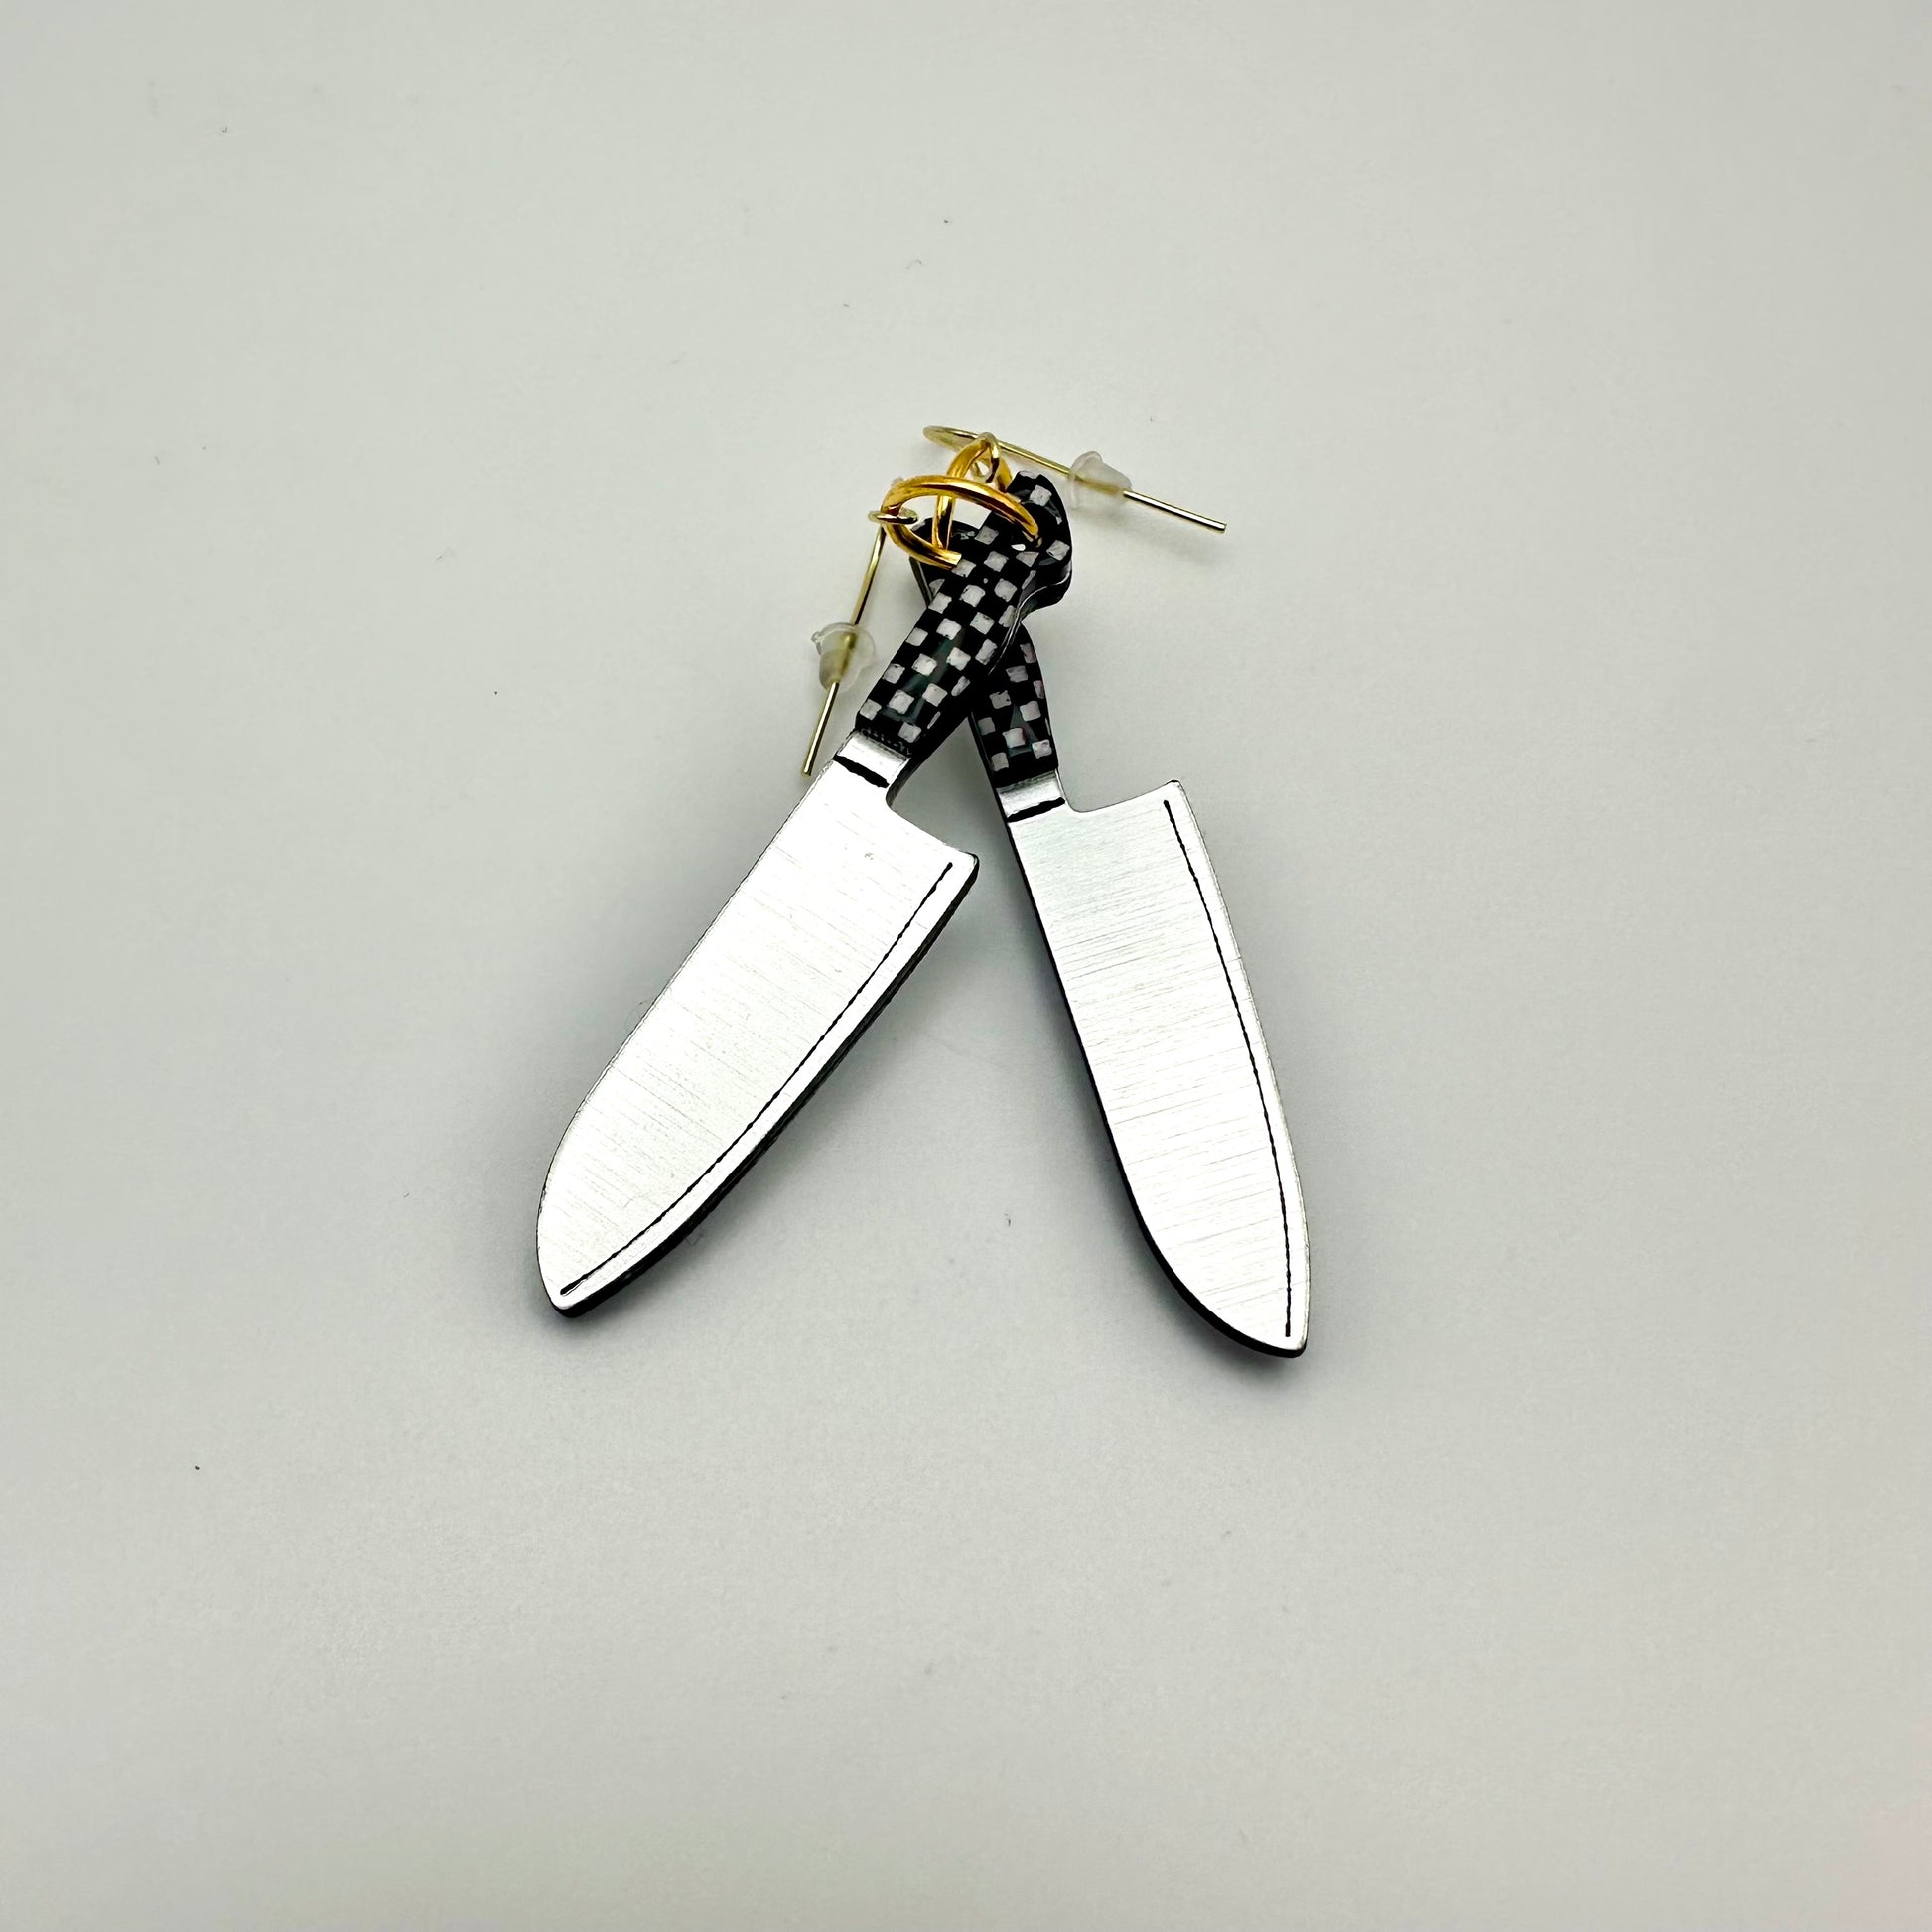 2 earrings that look like knives. The handles are black and white checker. 